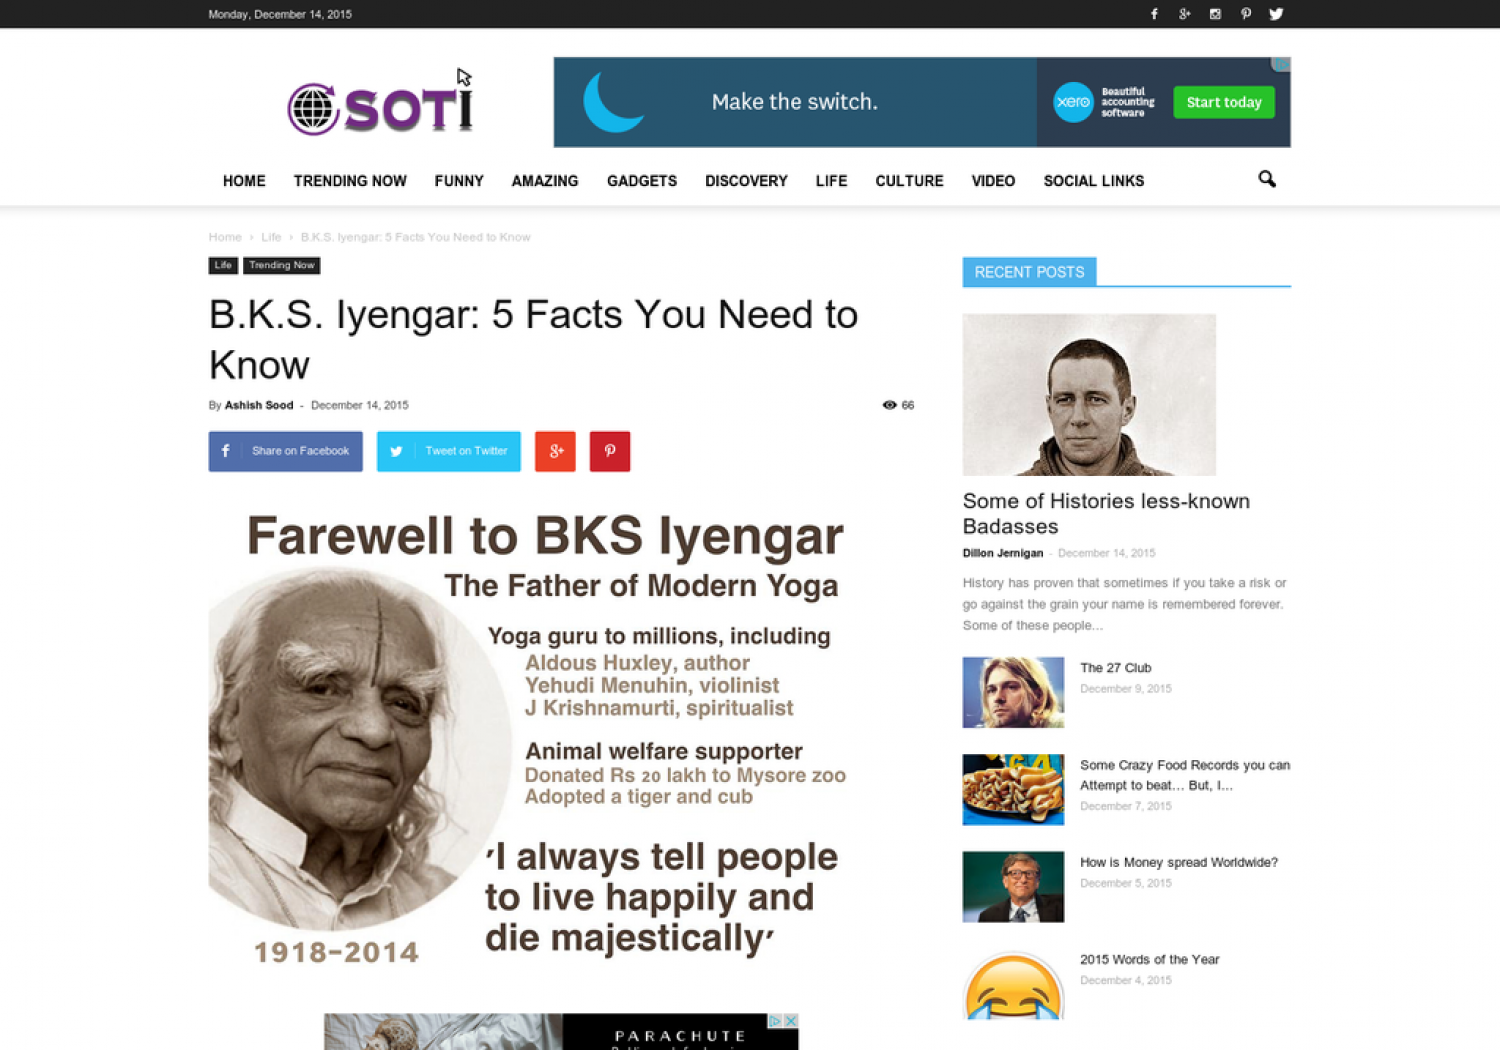 B.K.S. Iyengar: 5 Facts You Need to Know Infographic